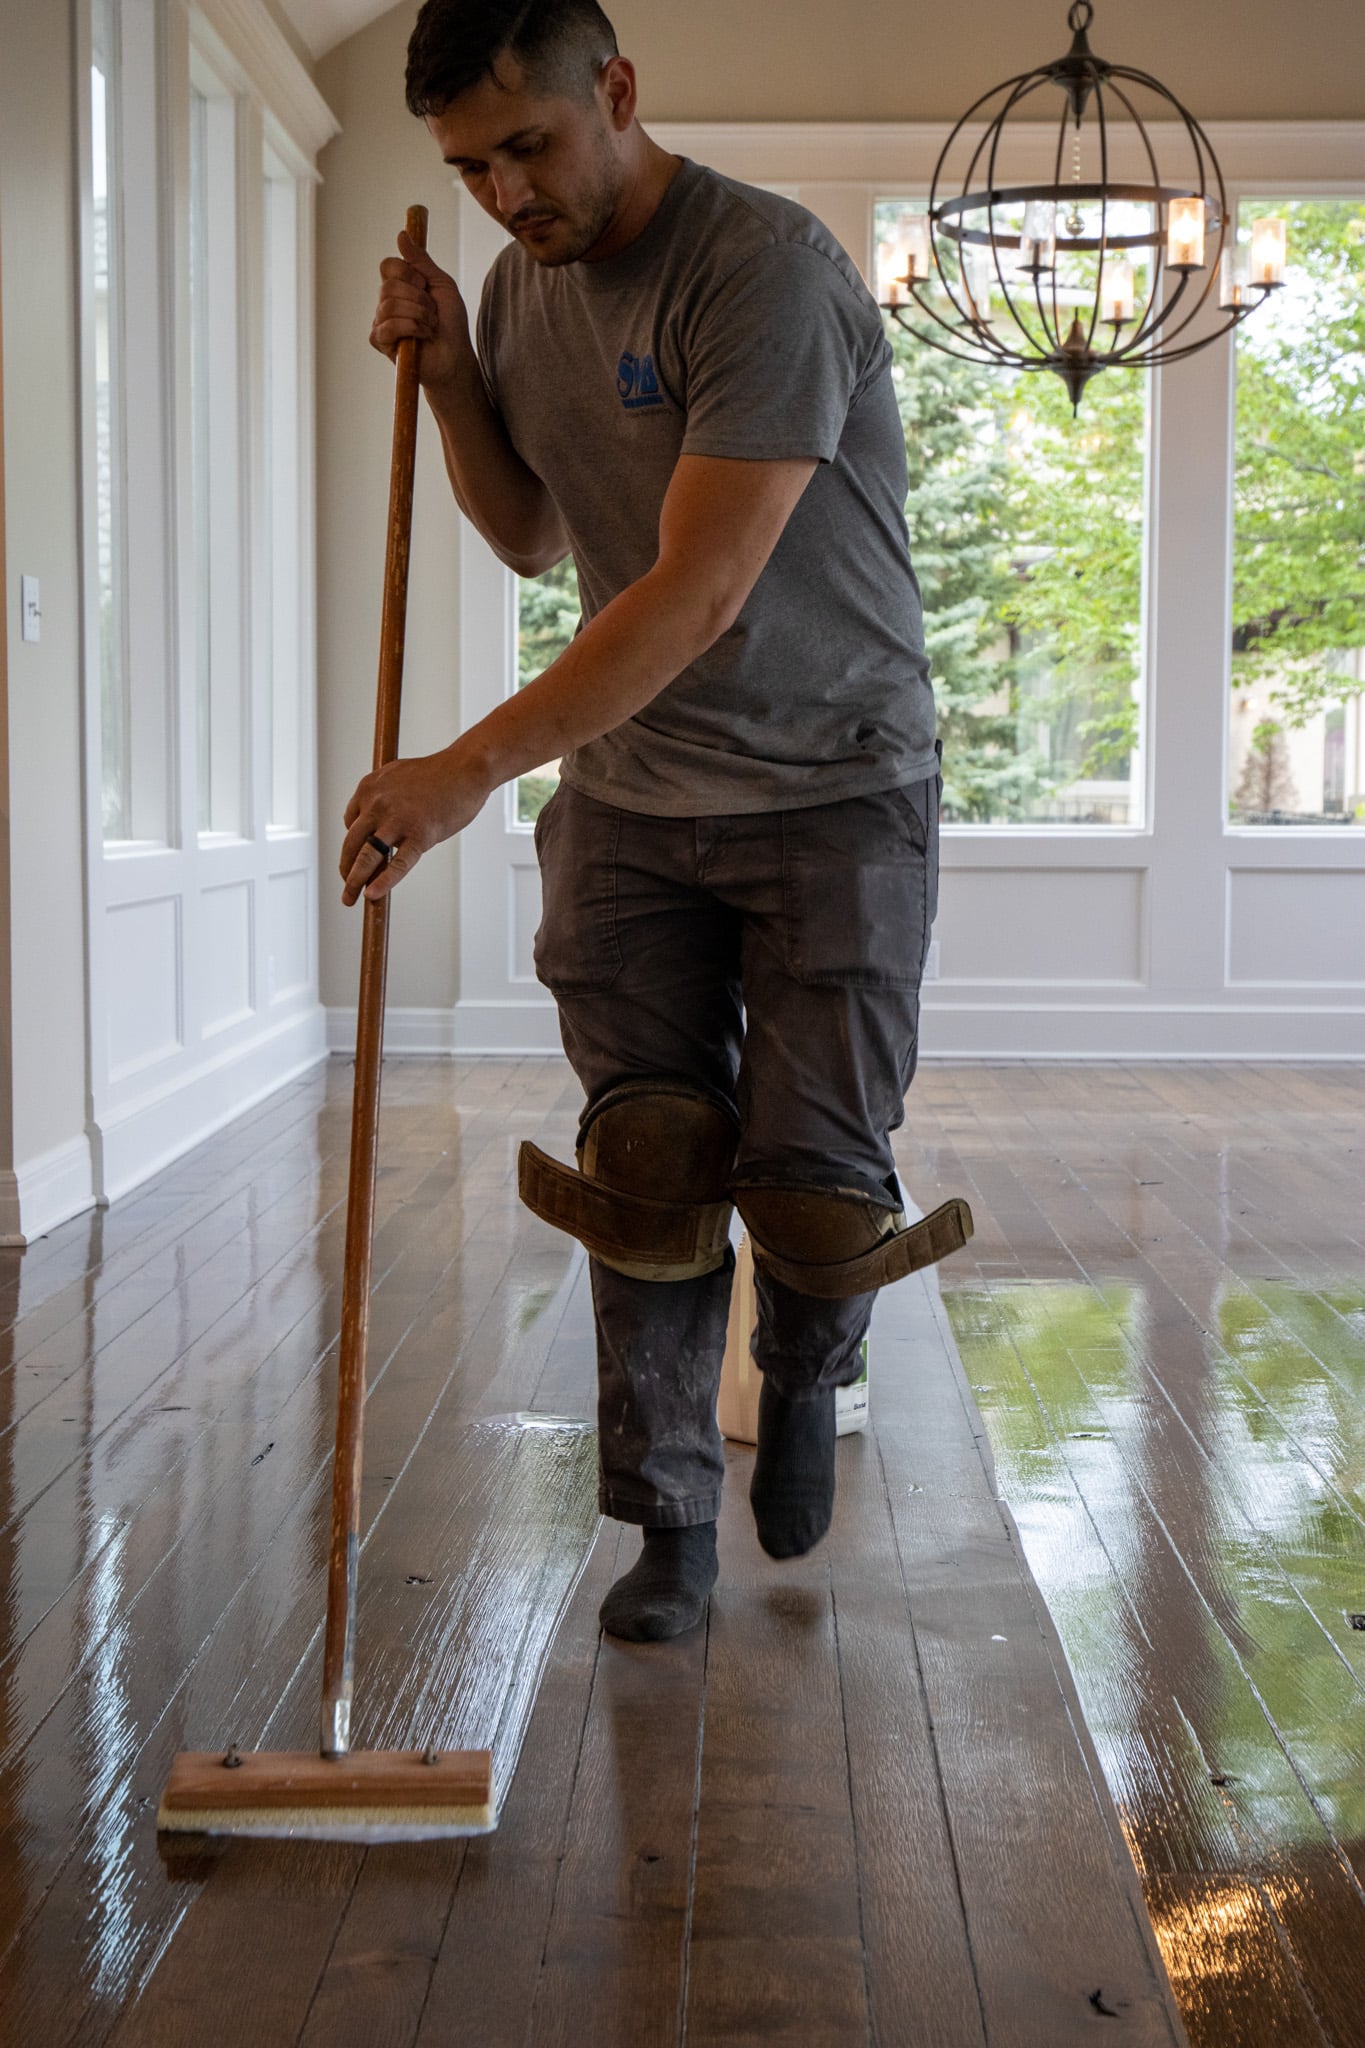 A hardwood flooring professional applies finish during the dustless refinishing process. Contact SVB Wood Floors to learn more about refinishing wood floors in Kansas City